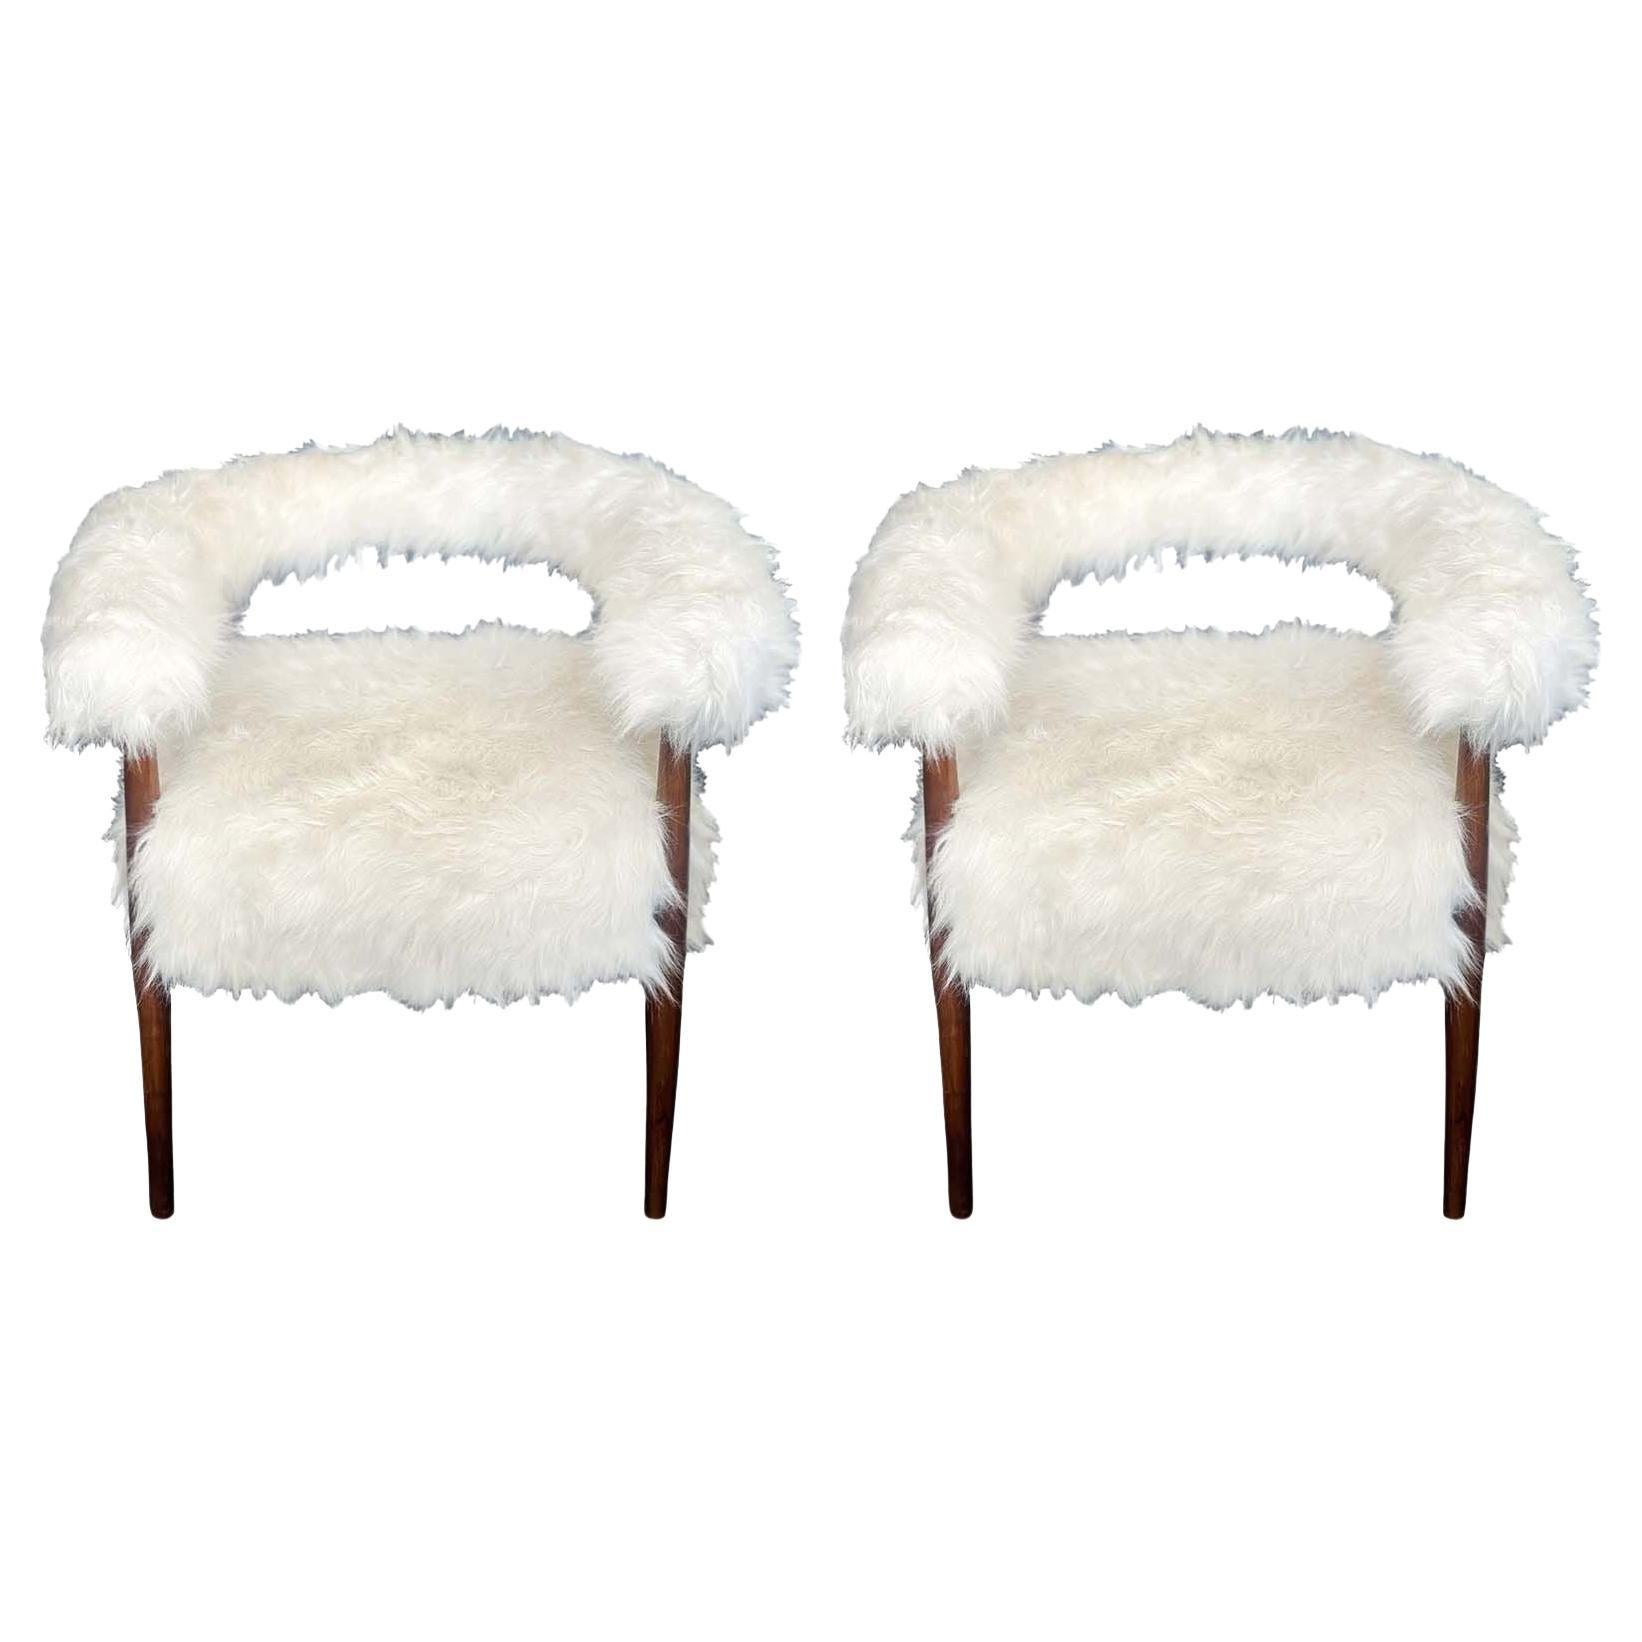 Pair of Italian Faux Goat Armchairs in the Style of Nanna Ditzel, c. 1970's For Sale